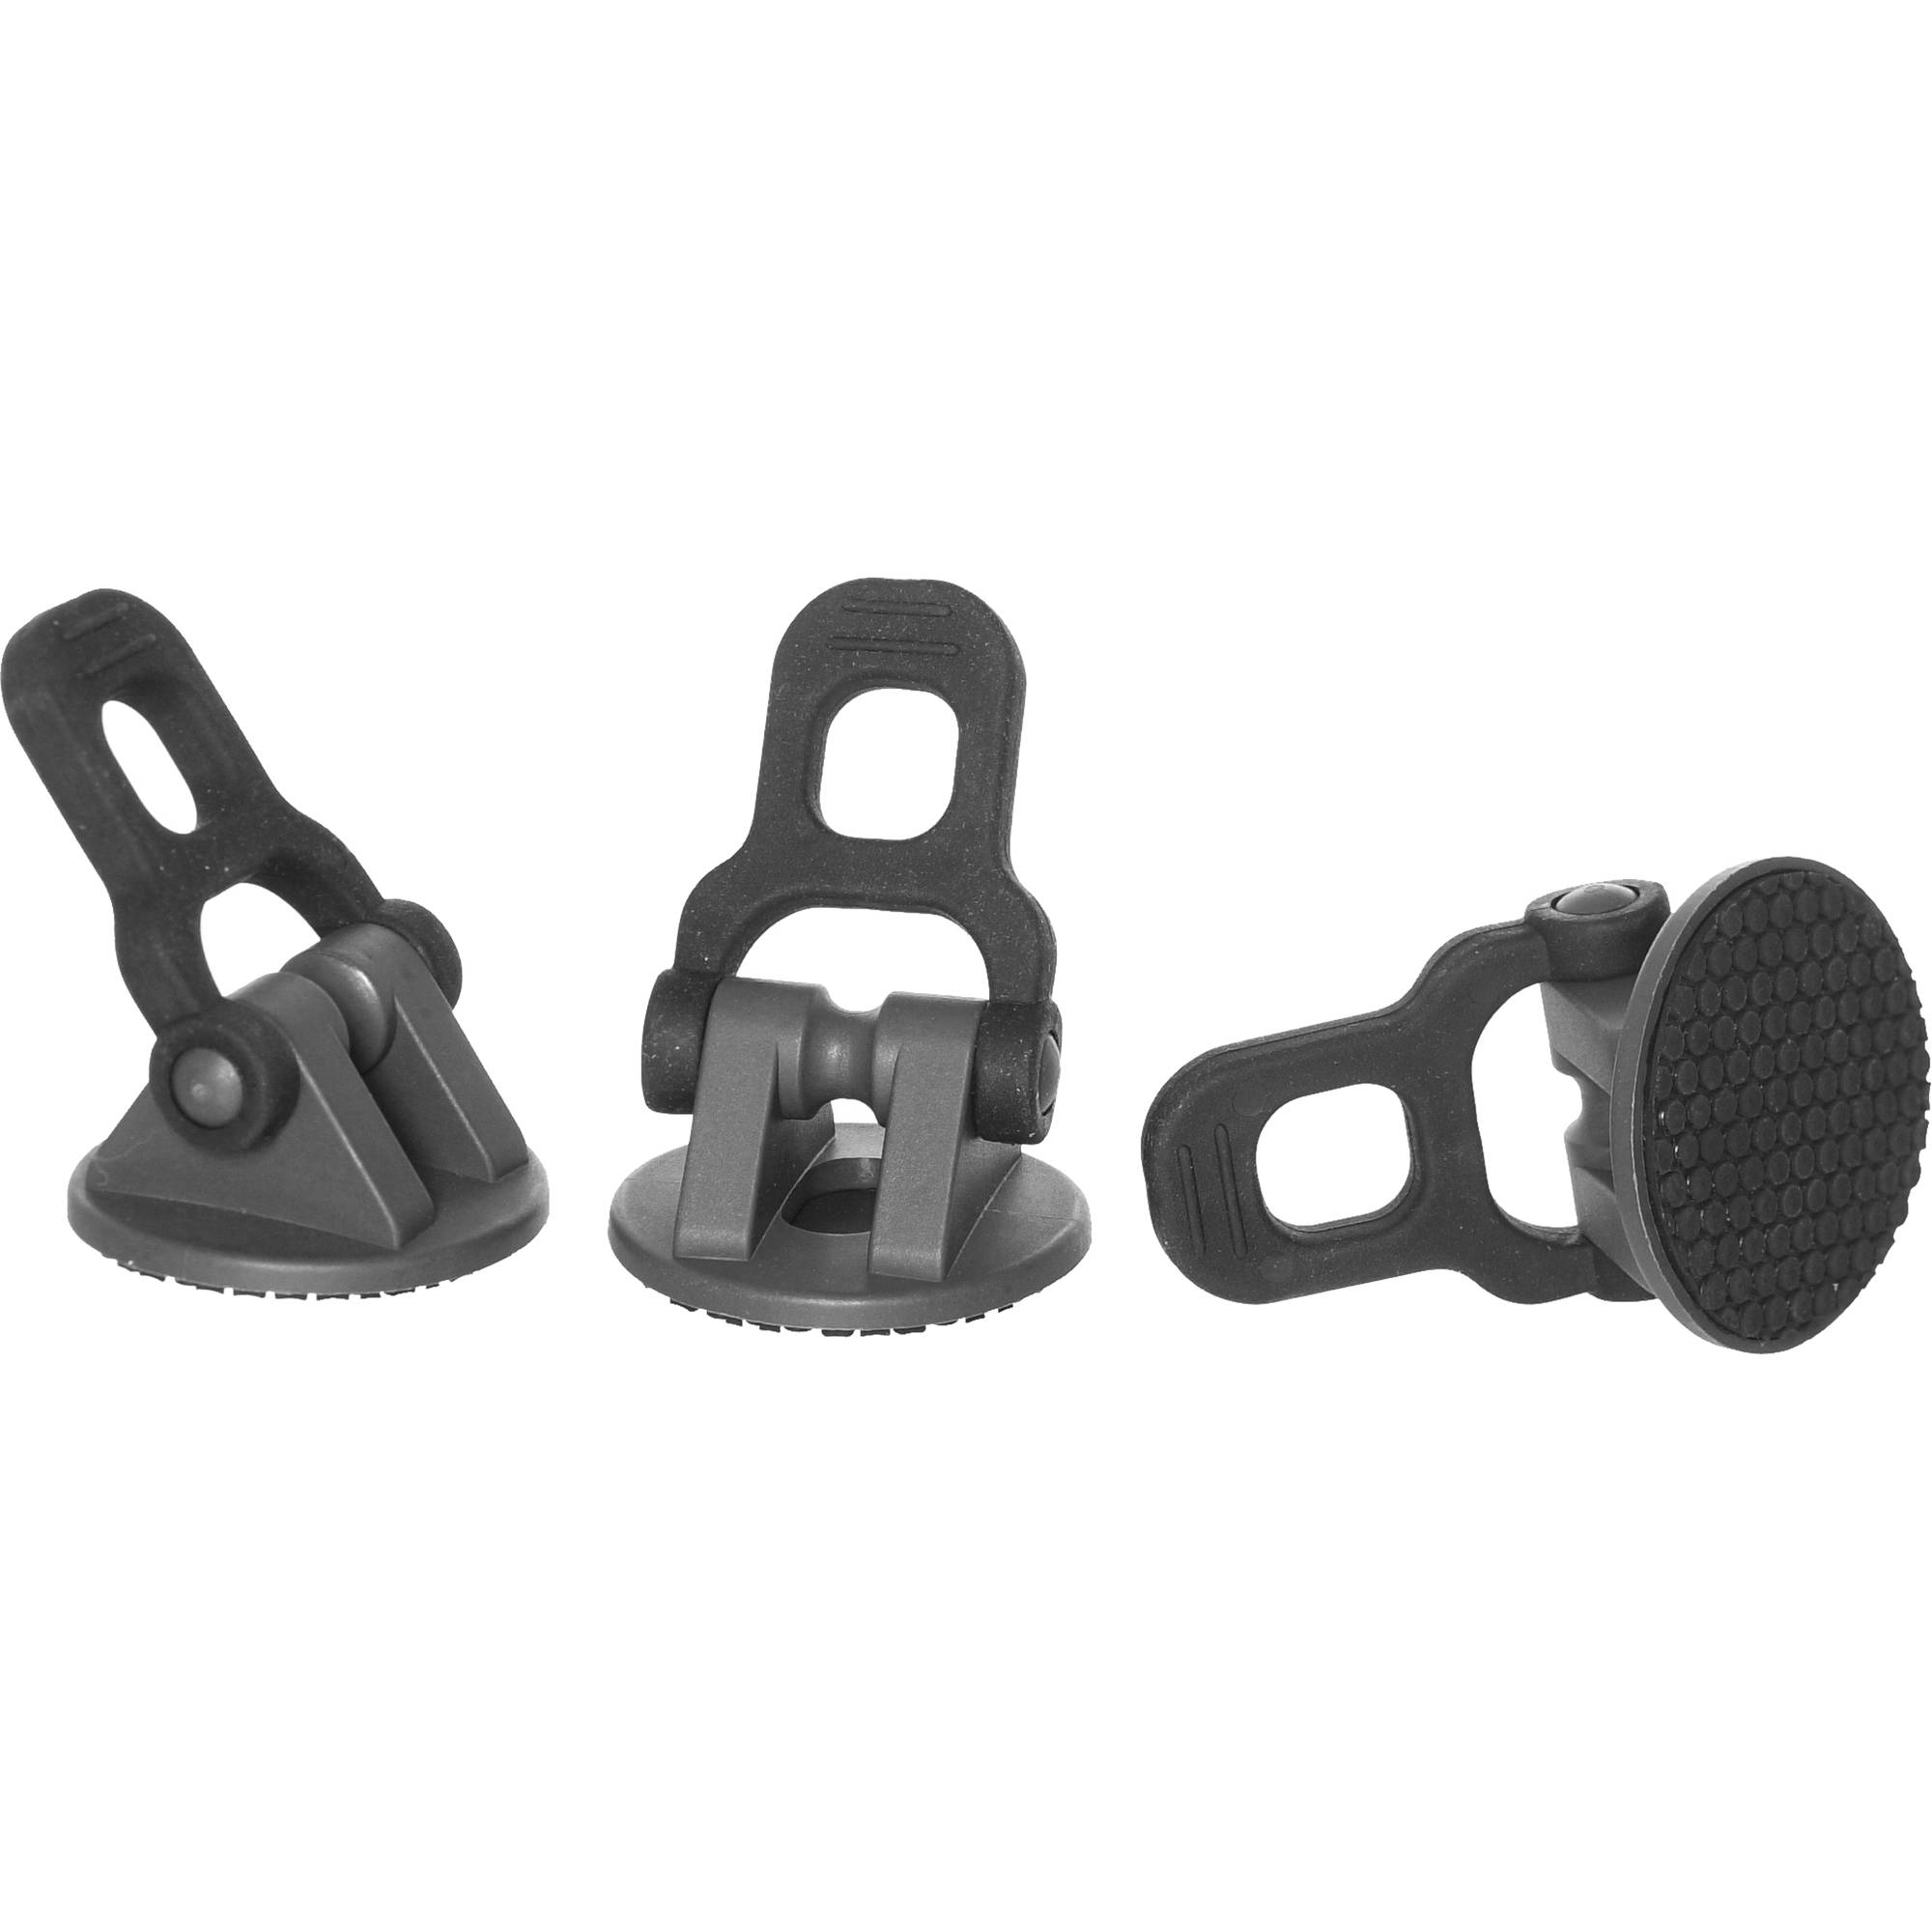 Miller 550 Rubber Feet Pads For Select Tripods Set Of 3 550